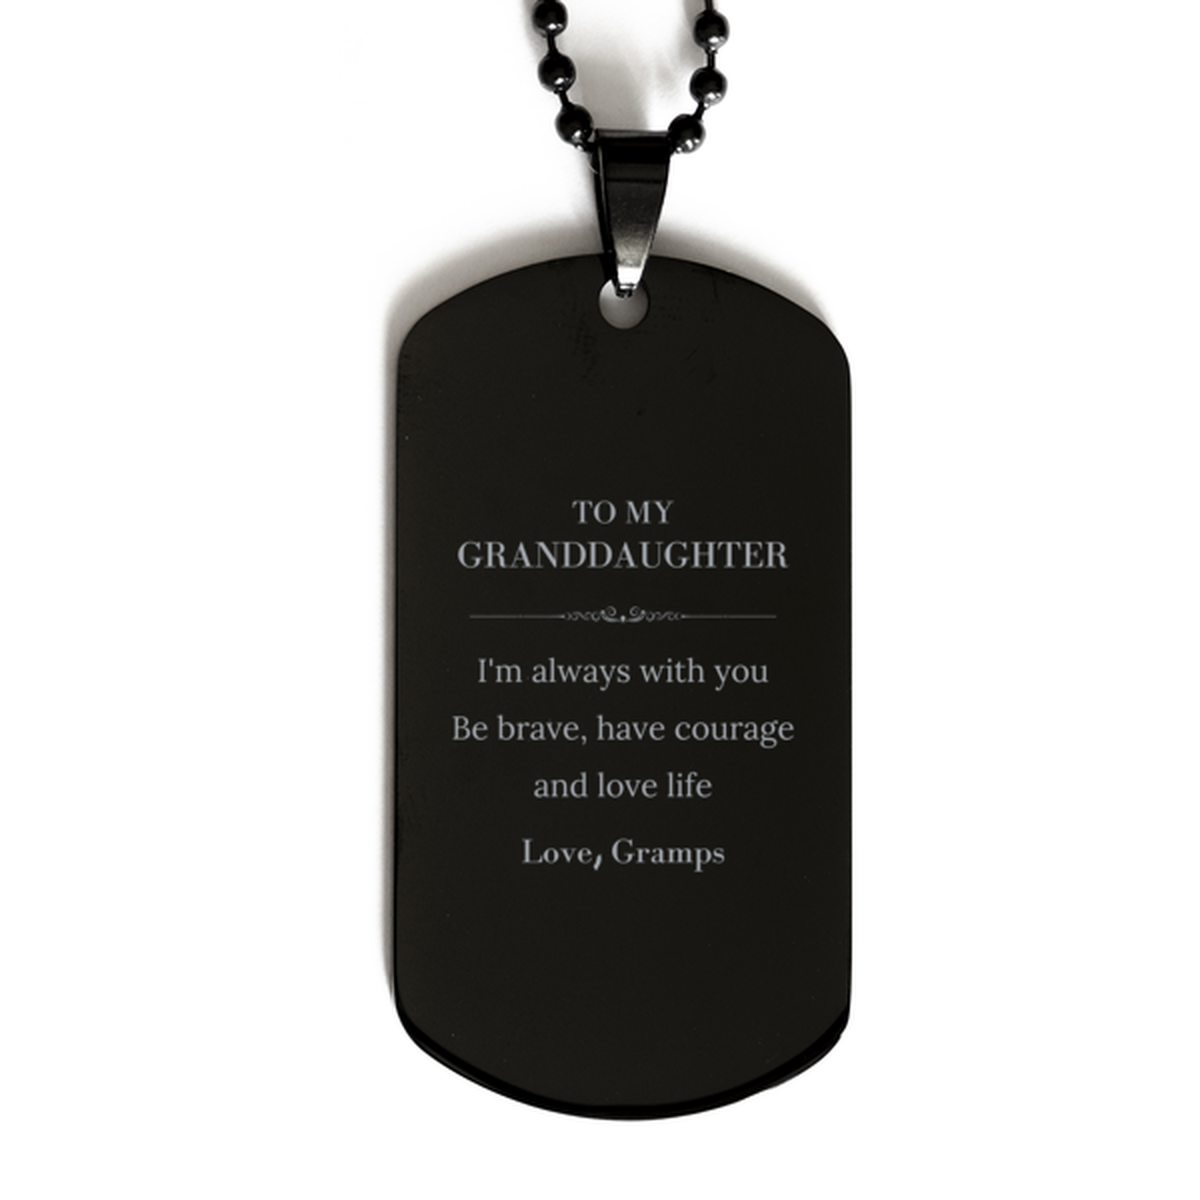 To My Granddaughter Gifts from Gramps, Unique Black Dog Tag Inspirational Christmas Birthday Graduation Gifts for Granddaughter I'm always with you. Be brave, have courage and love life. Love, Gramps